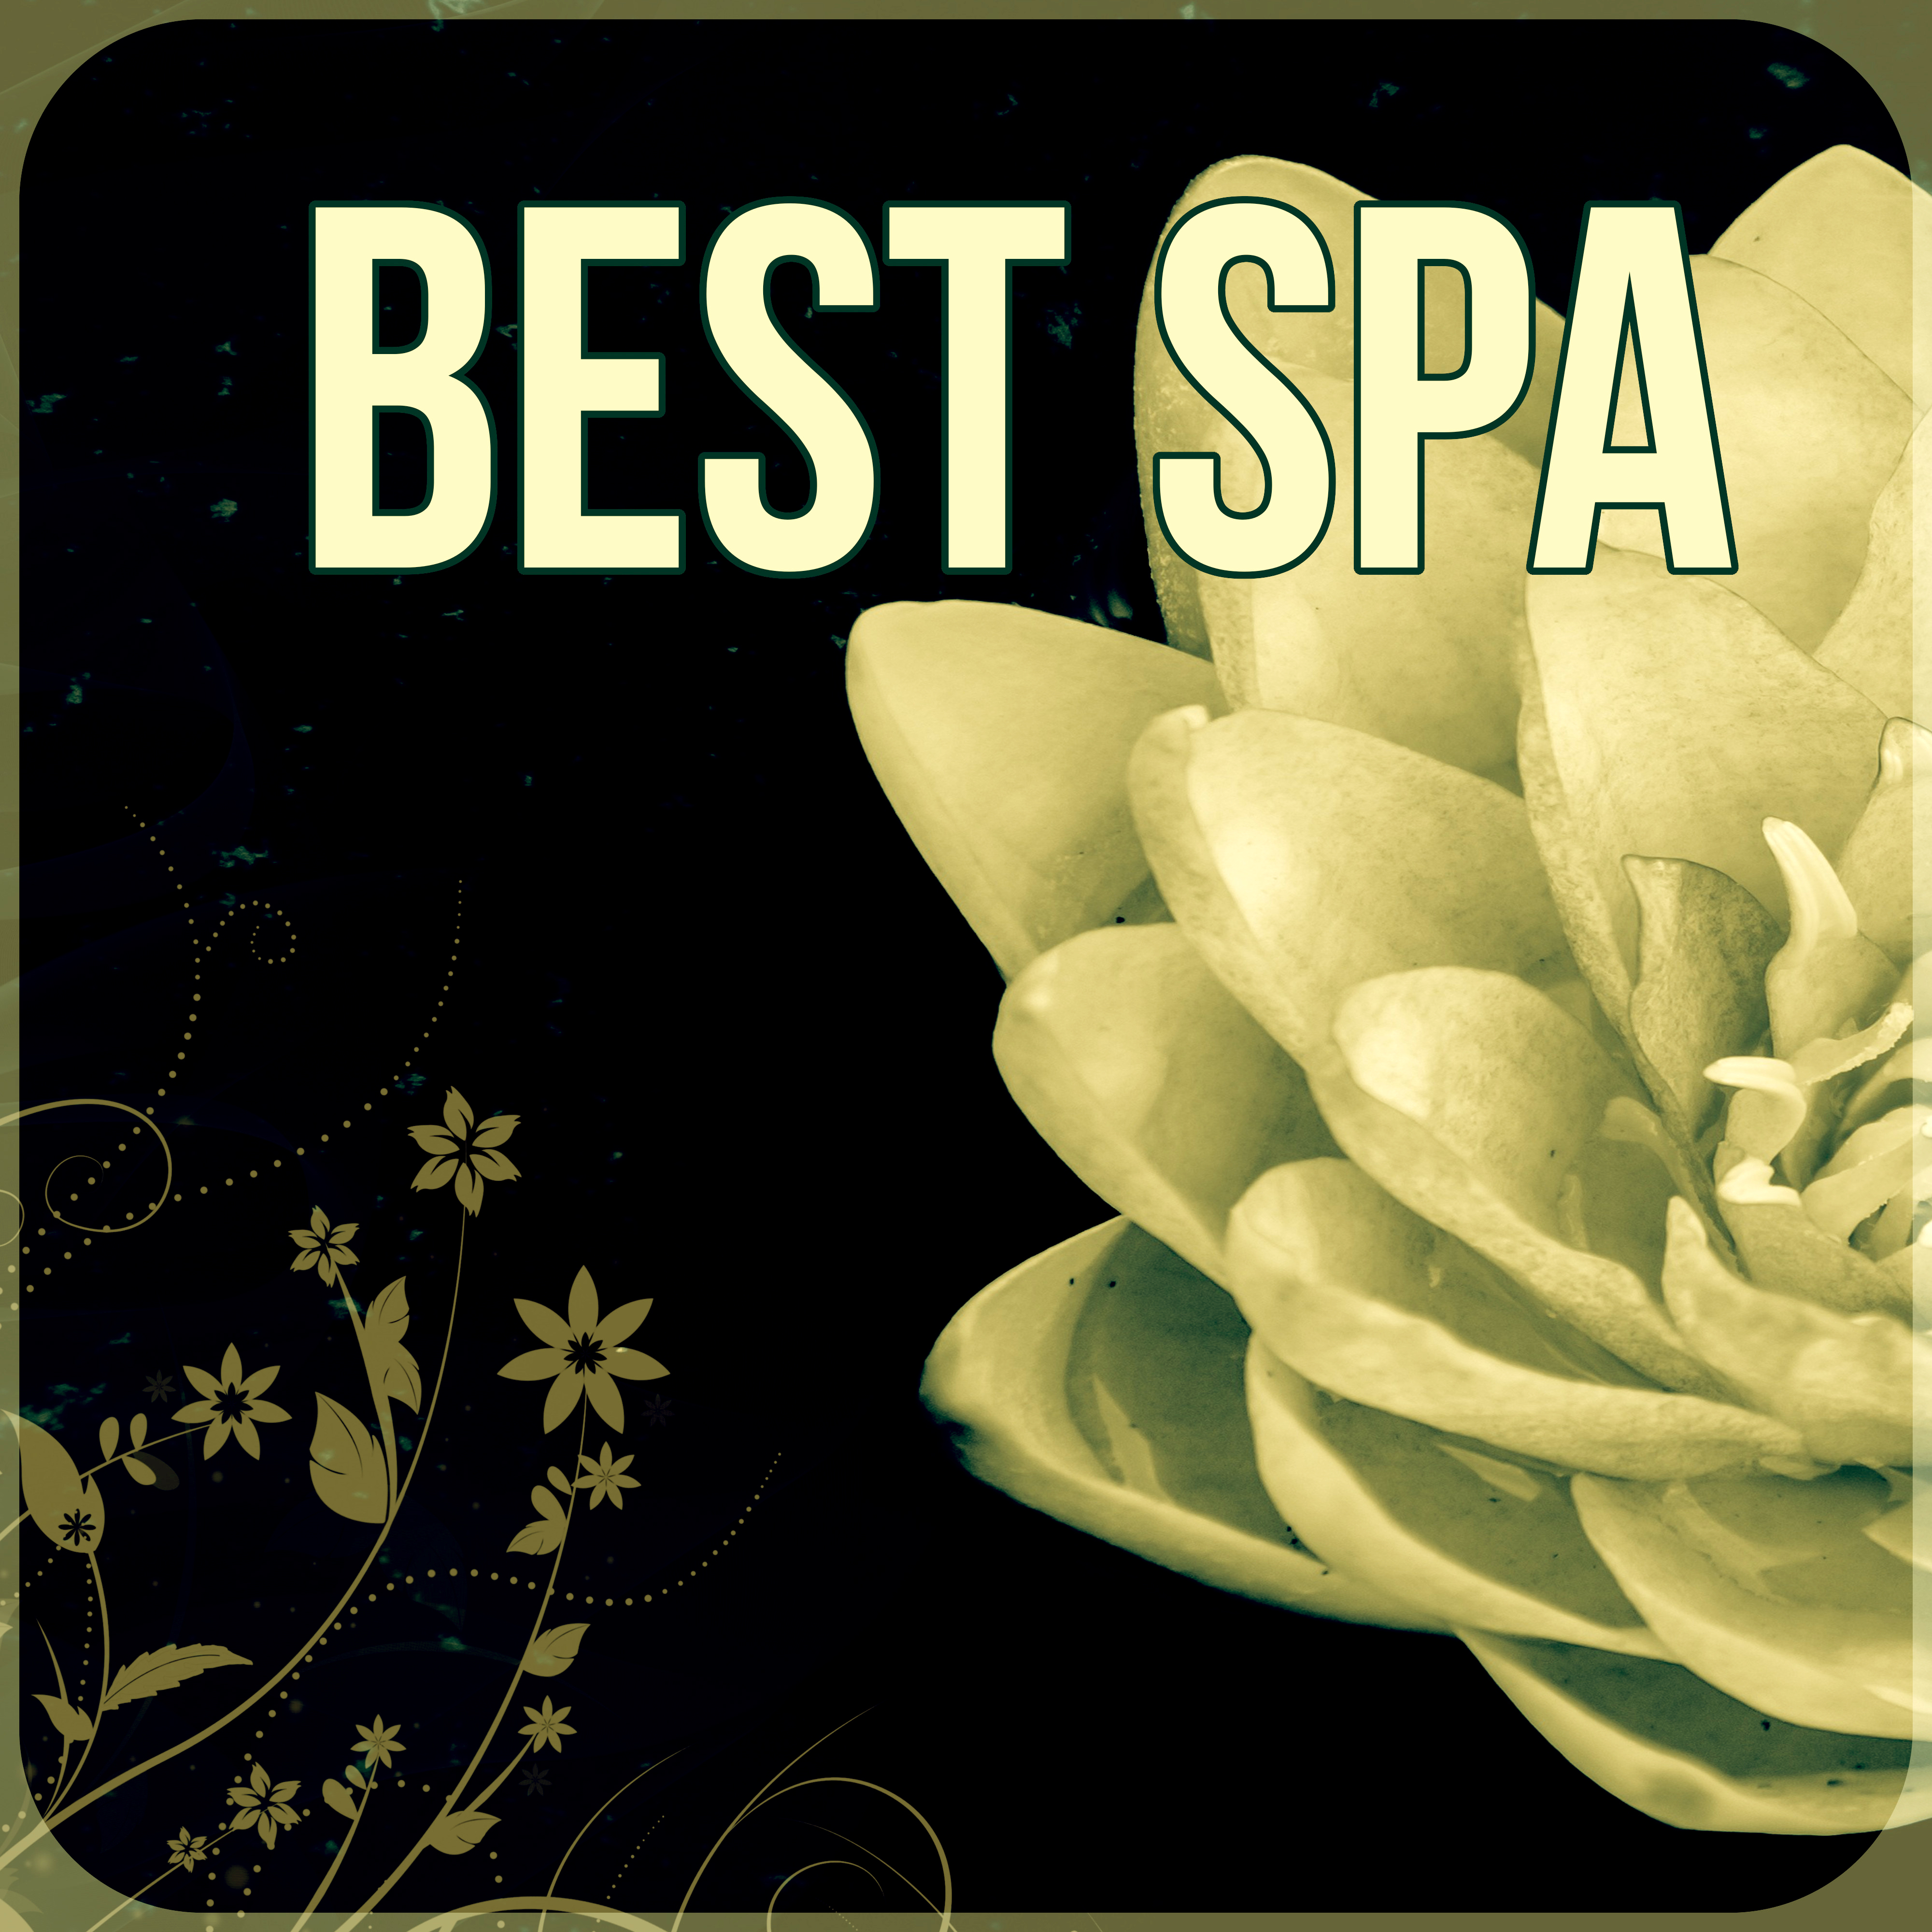 Best Spa – New Age Music for Massage, Music Therapy, Ocean Waves, Hydro Energy Body Massage, First Class, Aromatherapy, Wellness, Well-Being